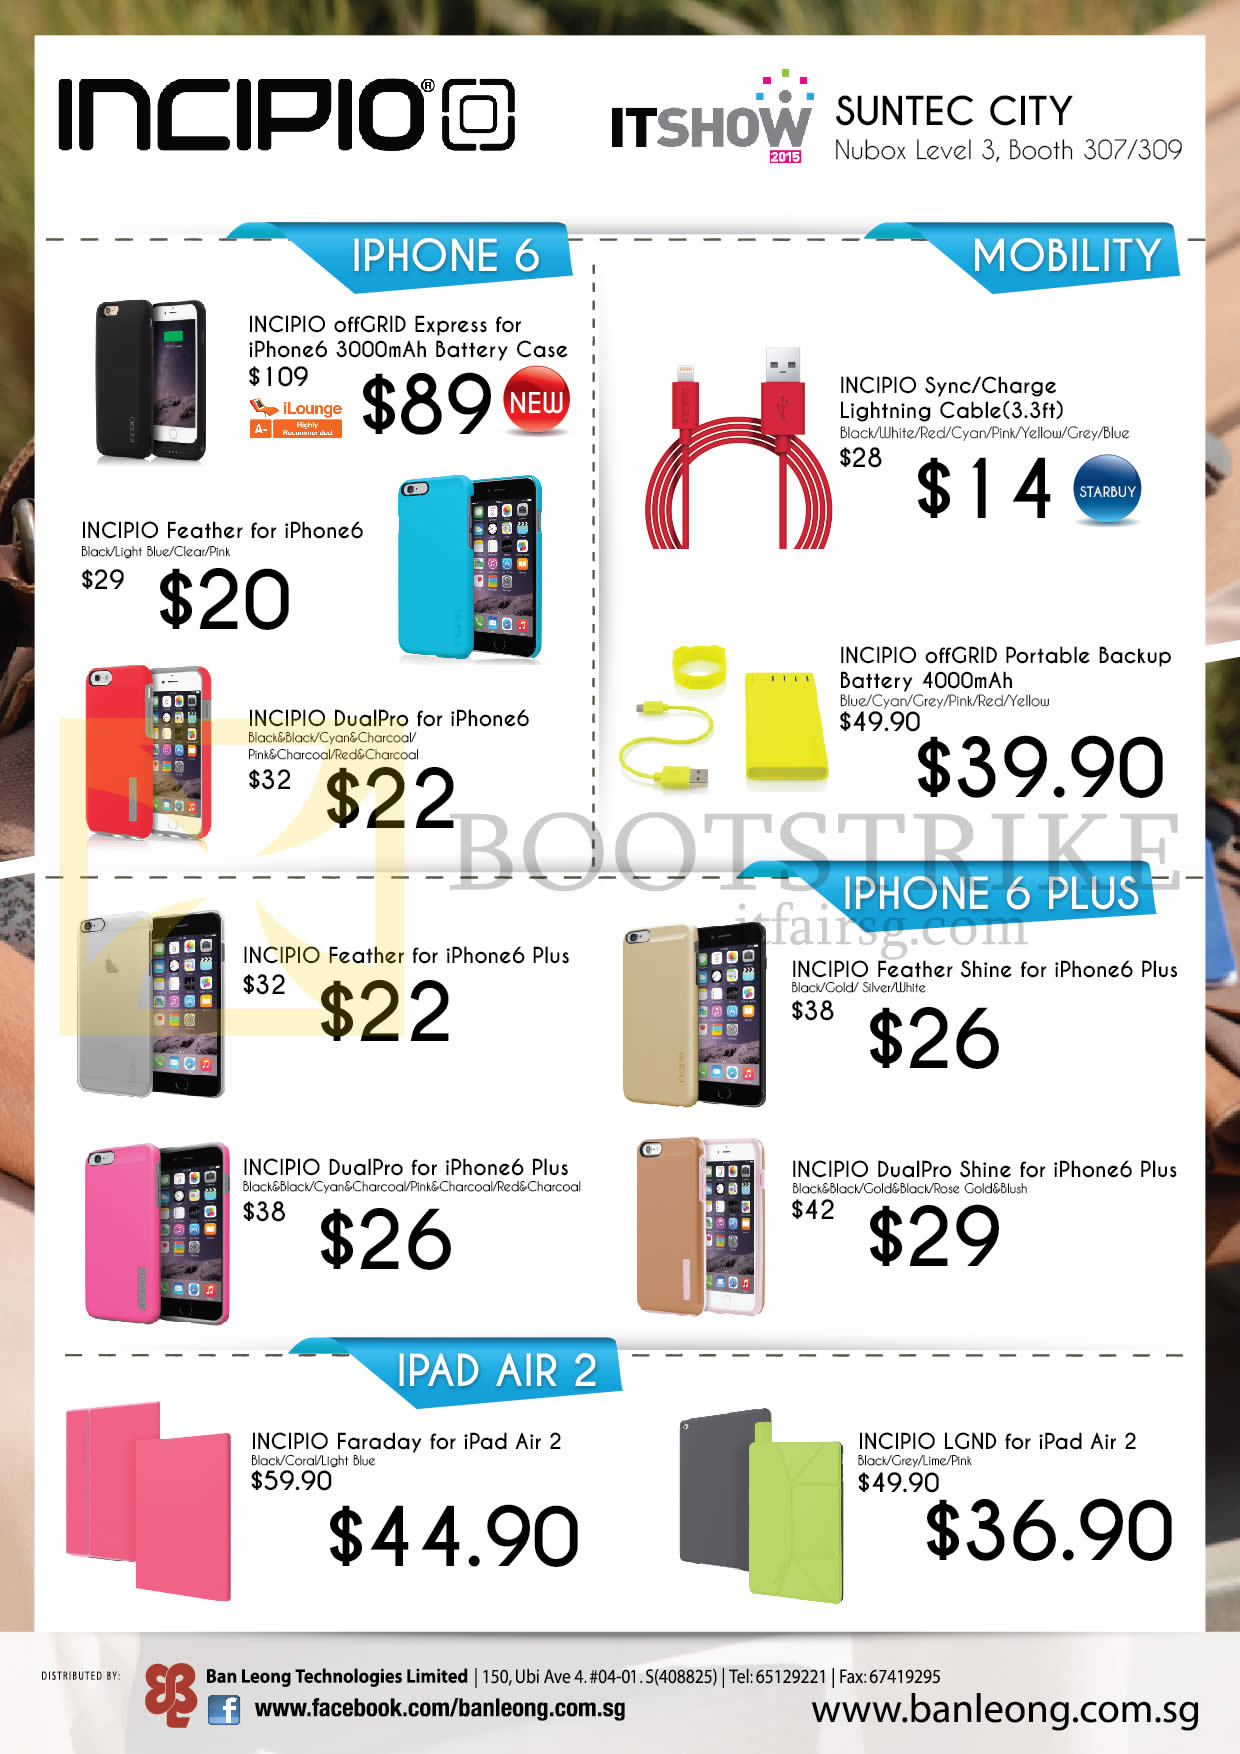 IT SHOW 2015 price list image brochure of Ban Leong Incipio Accessories Battery Cases, Cases, Powerbank, Lightning Cable For Apple IPhone 6, 6 Plus, IPad Air 2